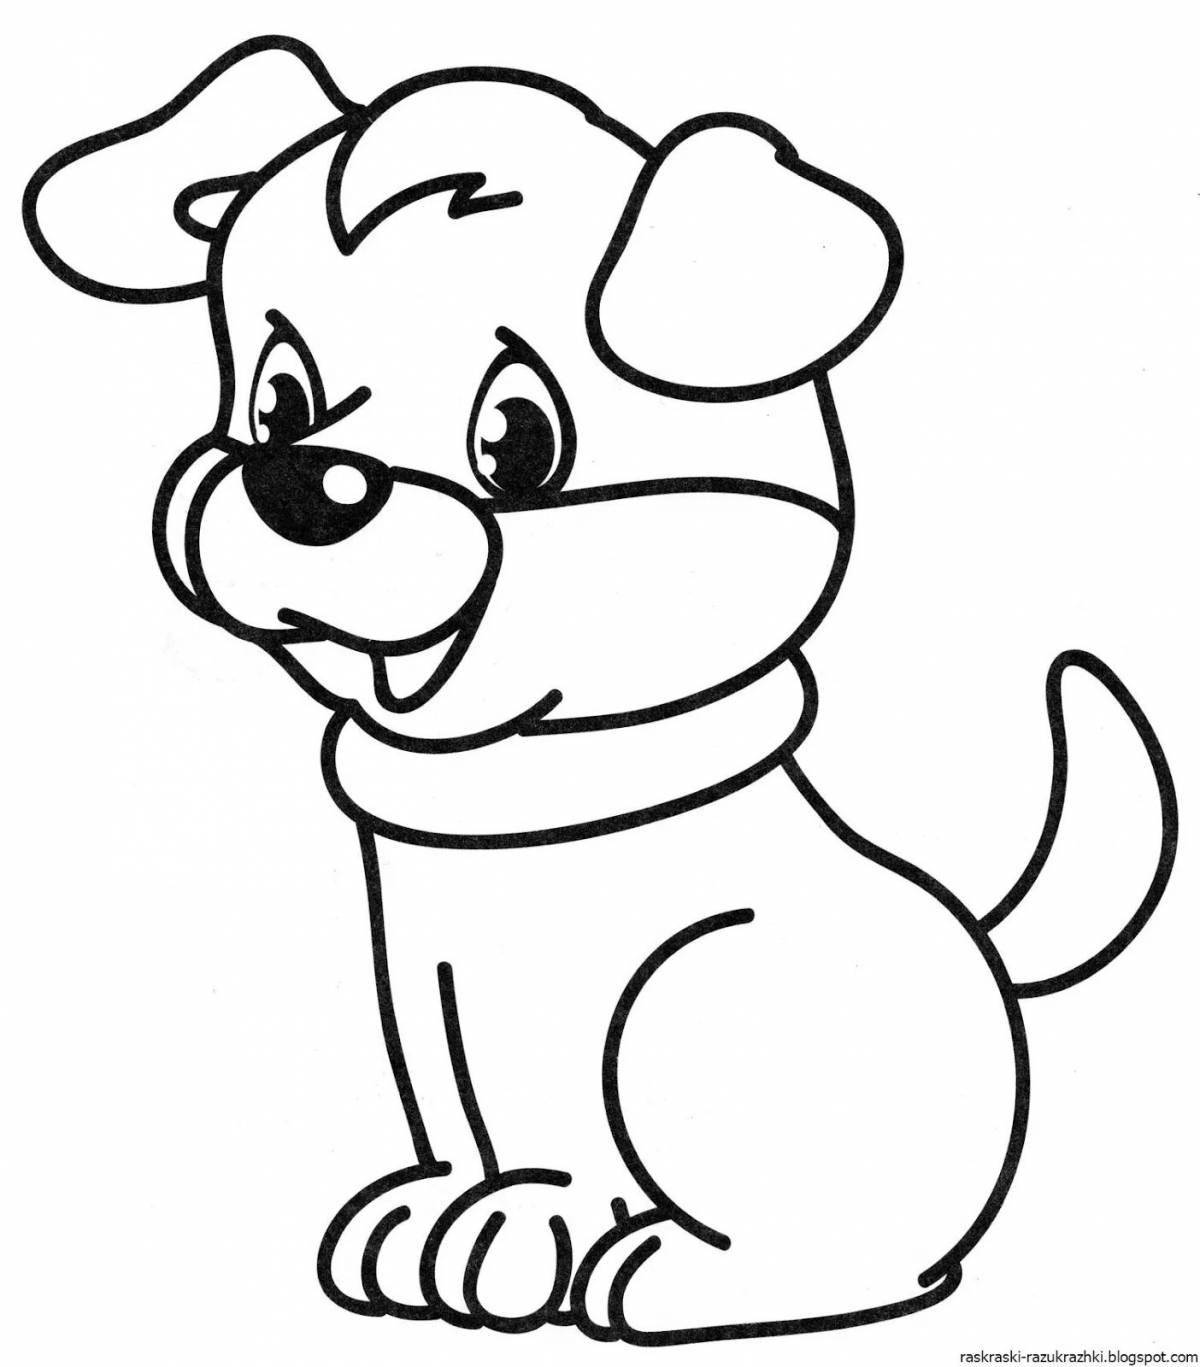 Outstanding dog coloring book for kids